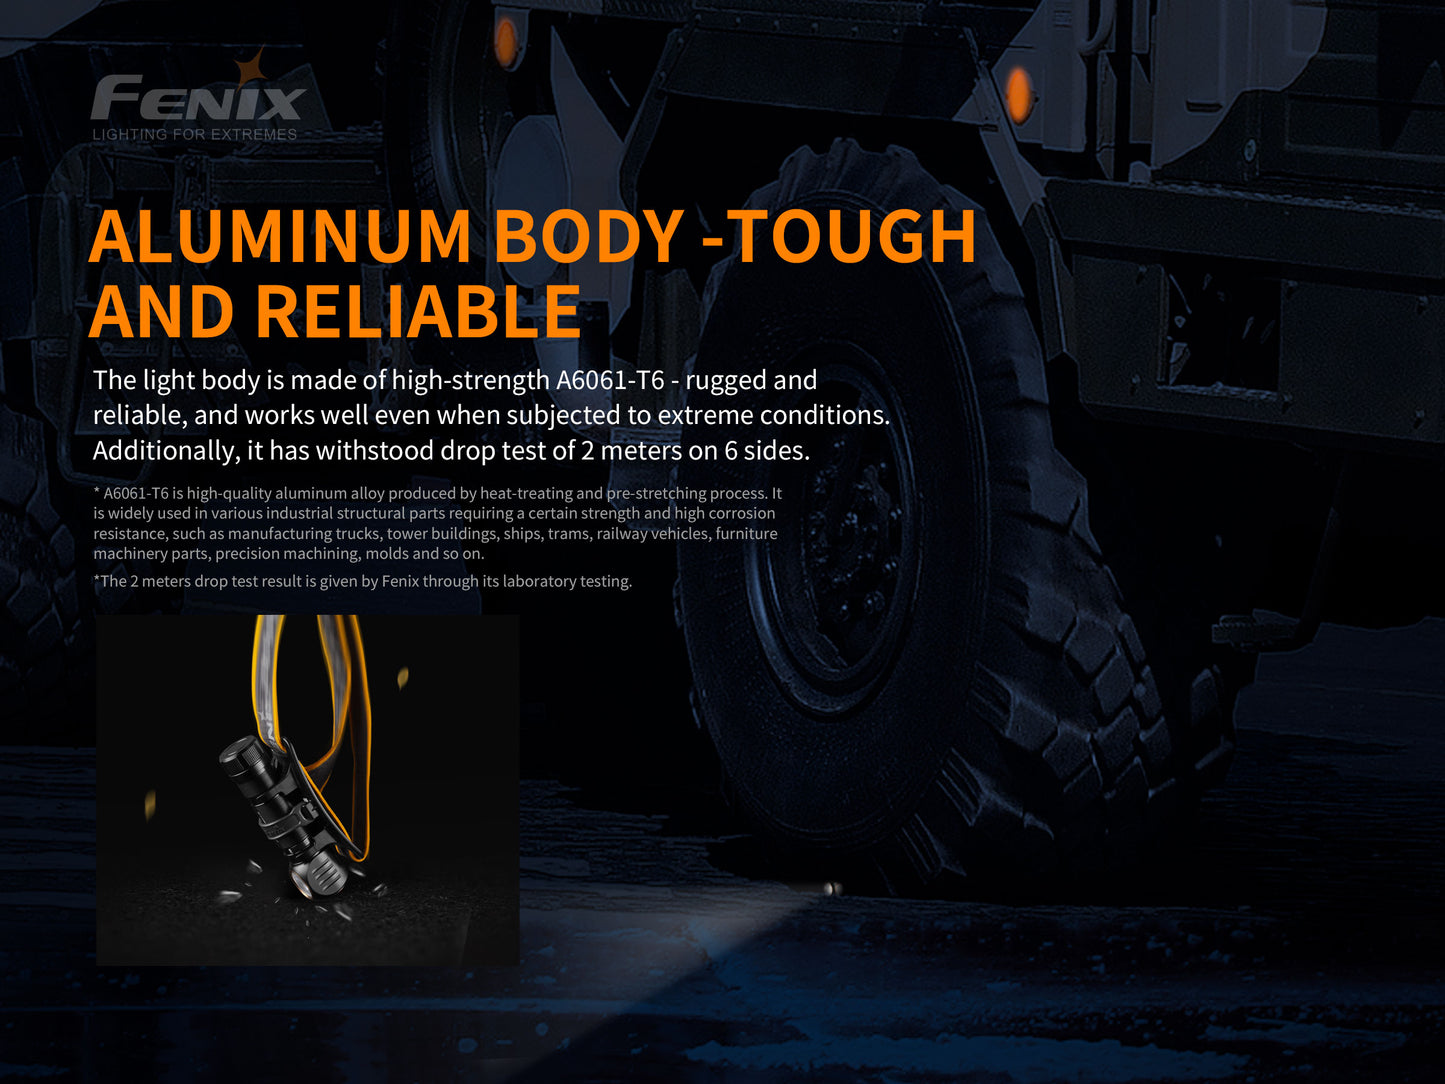 Fenix HM61R Right Angle Flashlight with Headlamp Feature